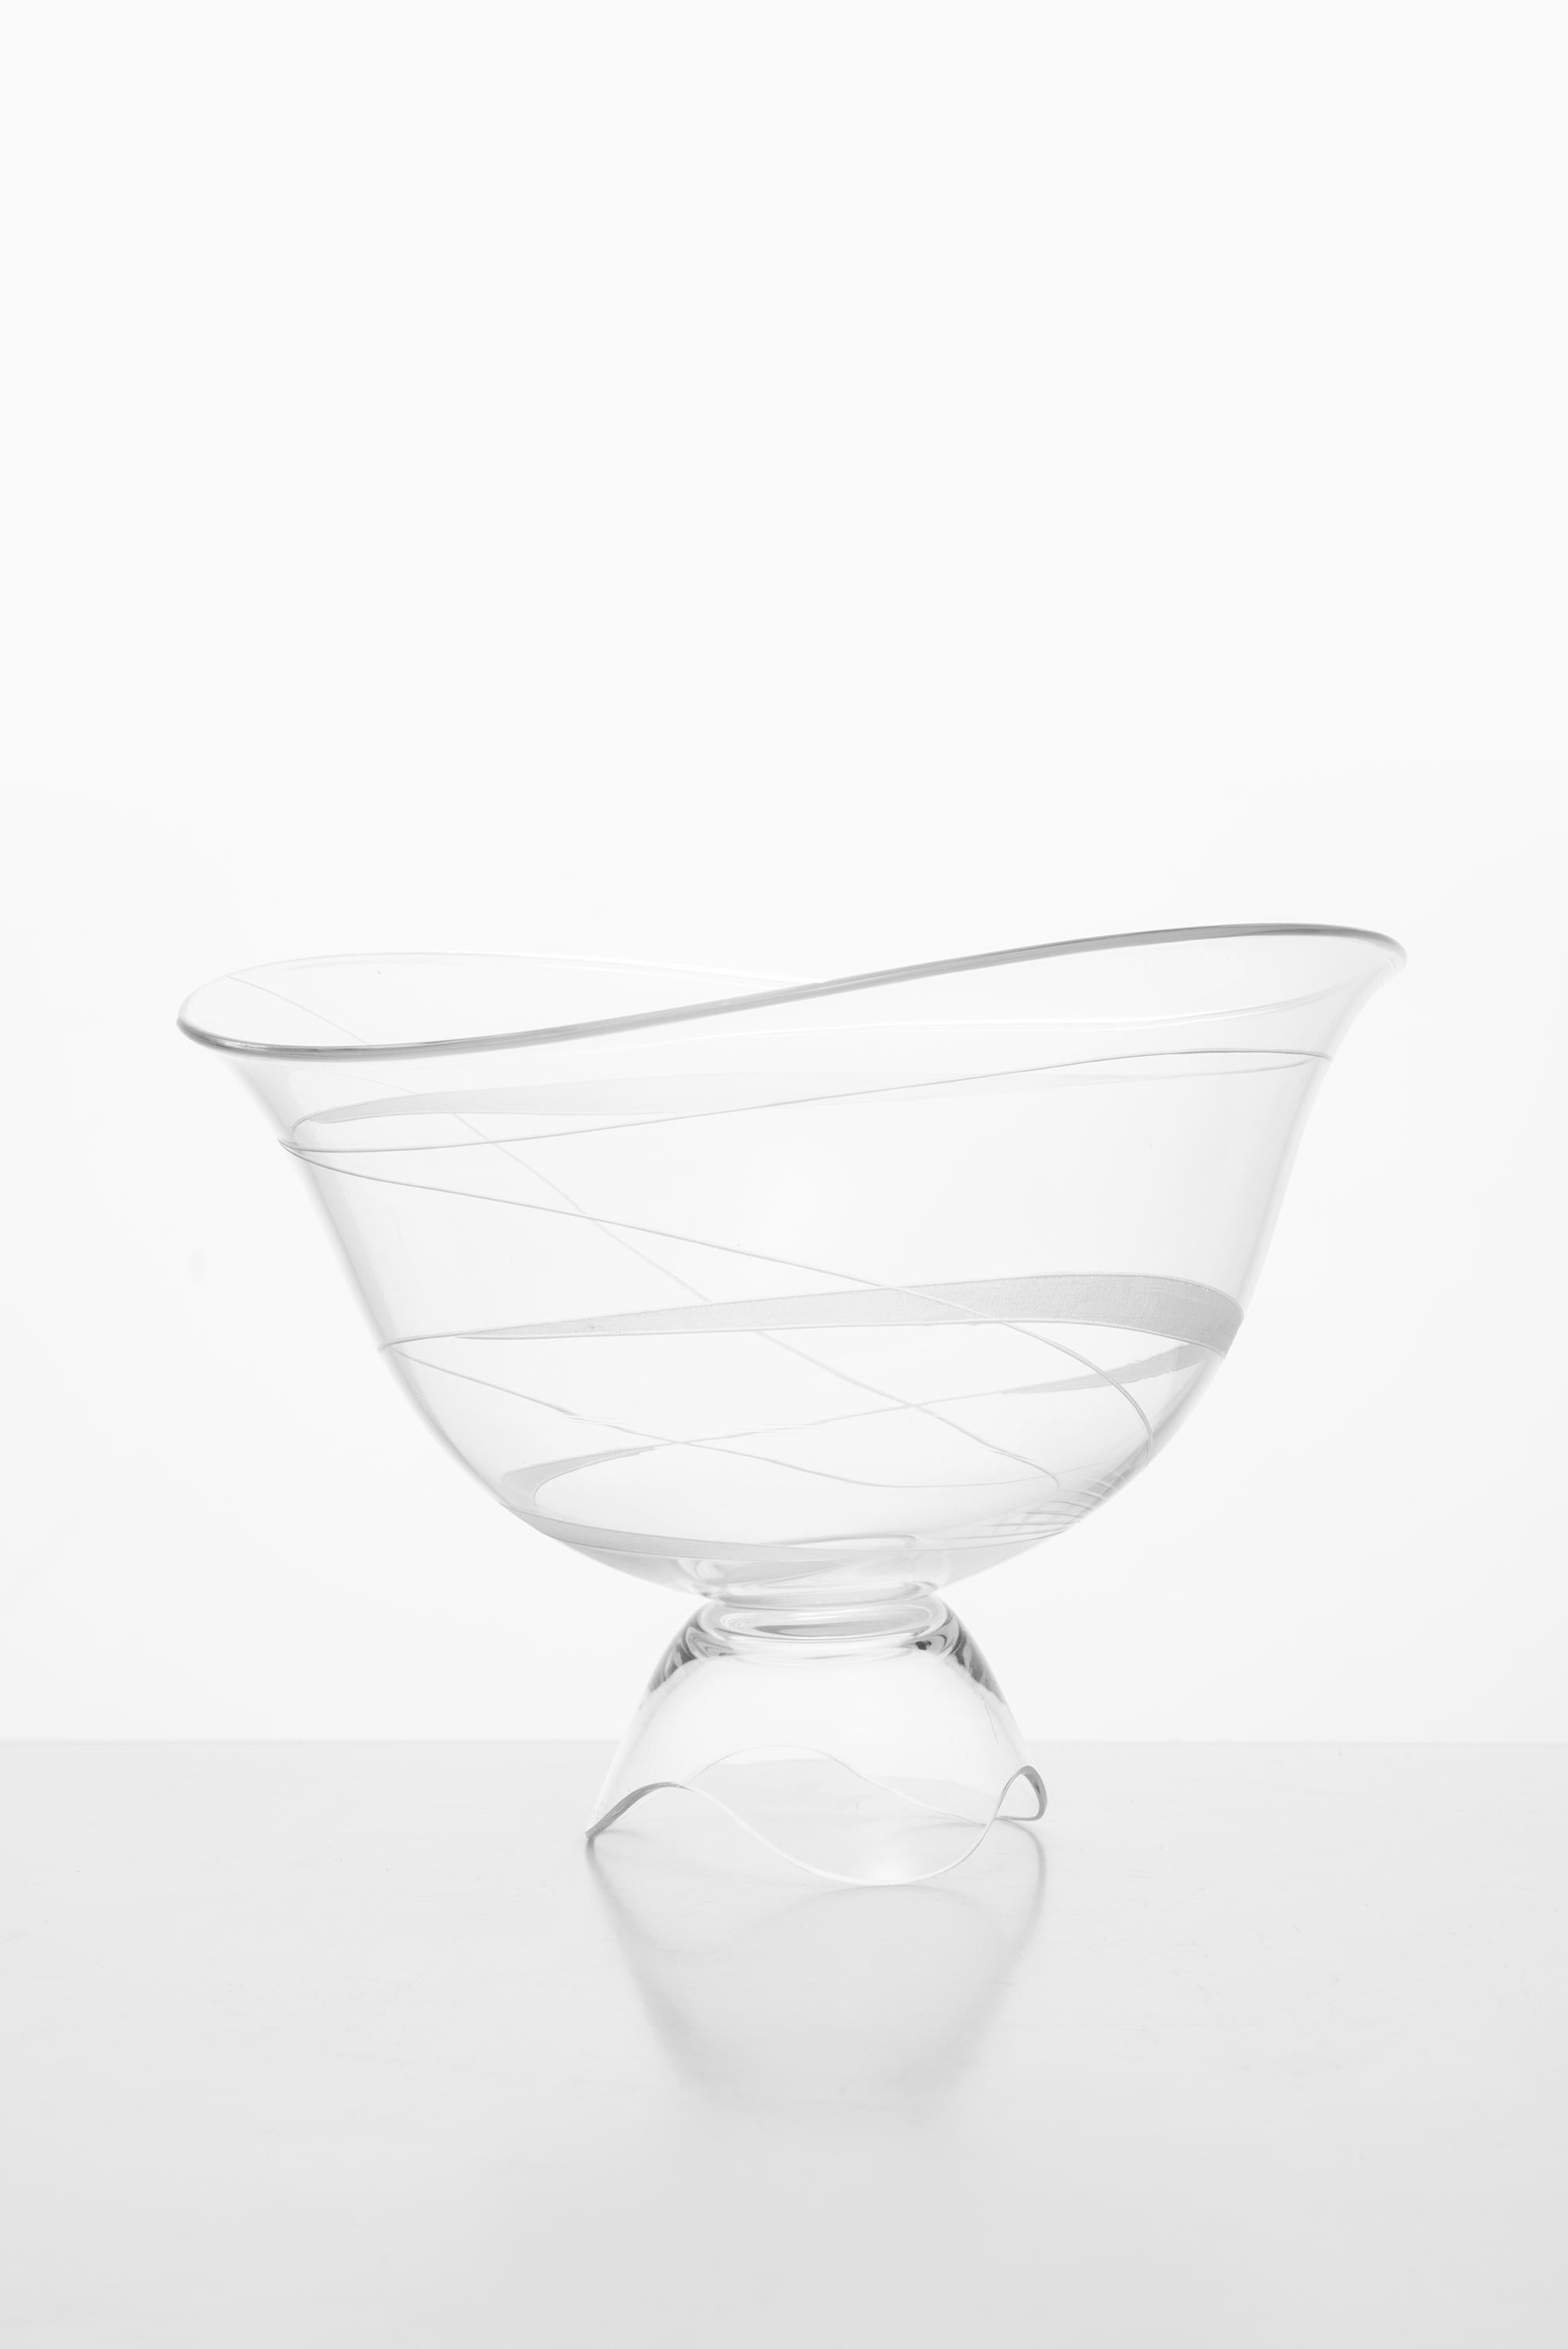 Vicke Lindstrand Glass Vase Produced by Kosta in Sweden In Good Condition For Sale In Limhamn, Skåne län